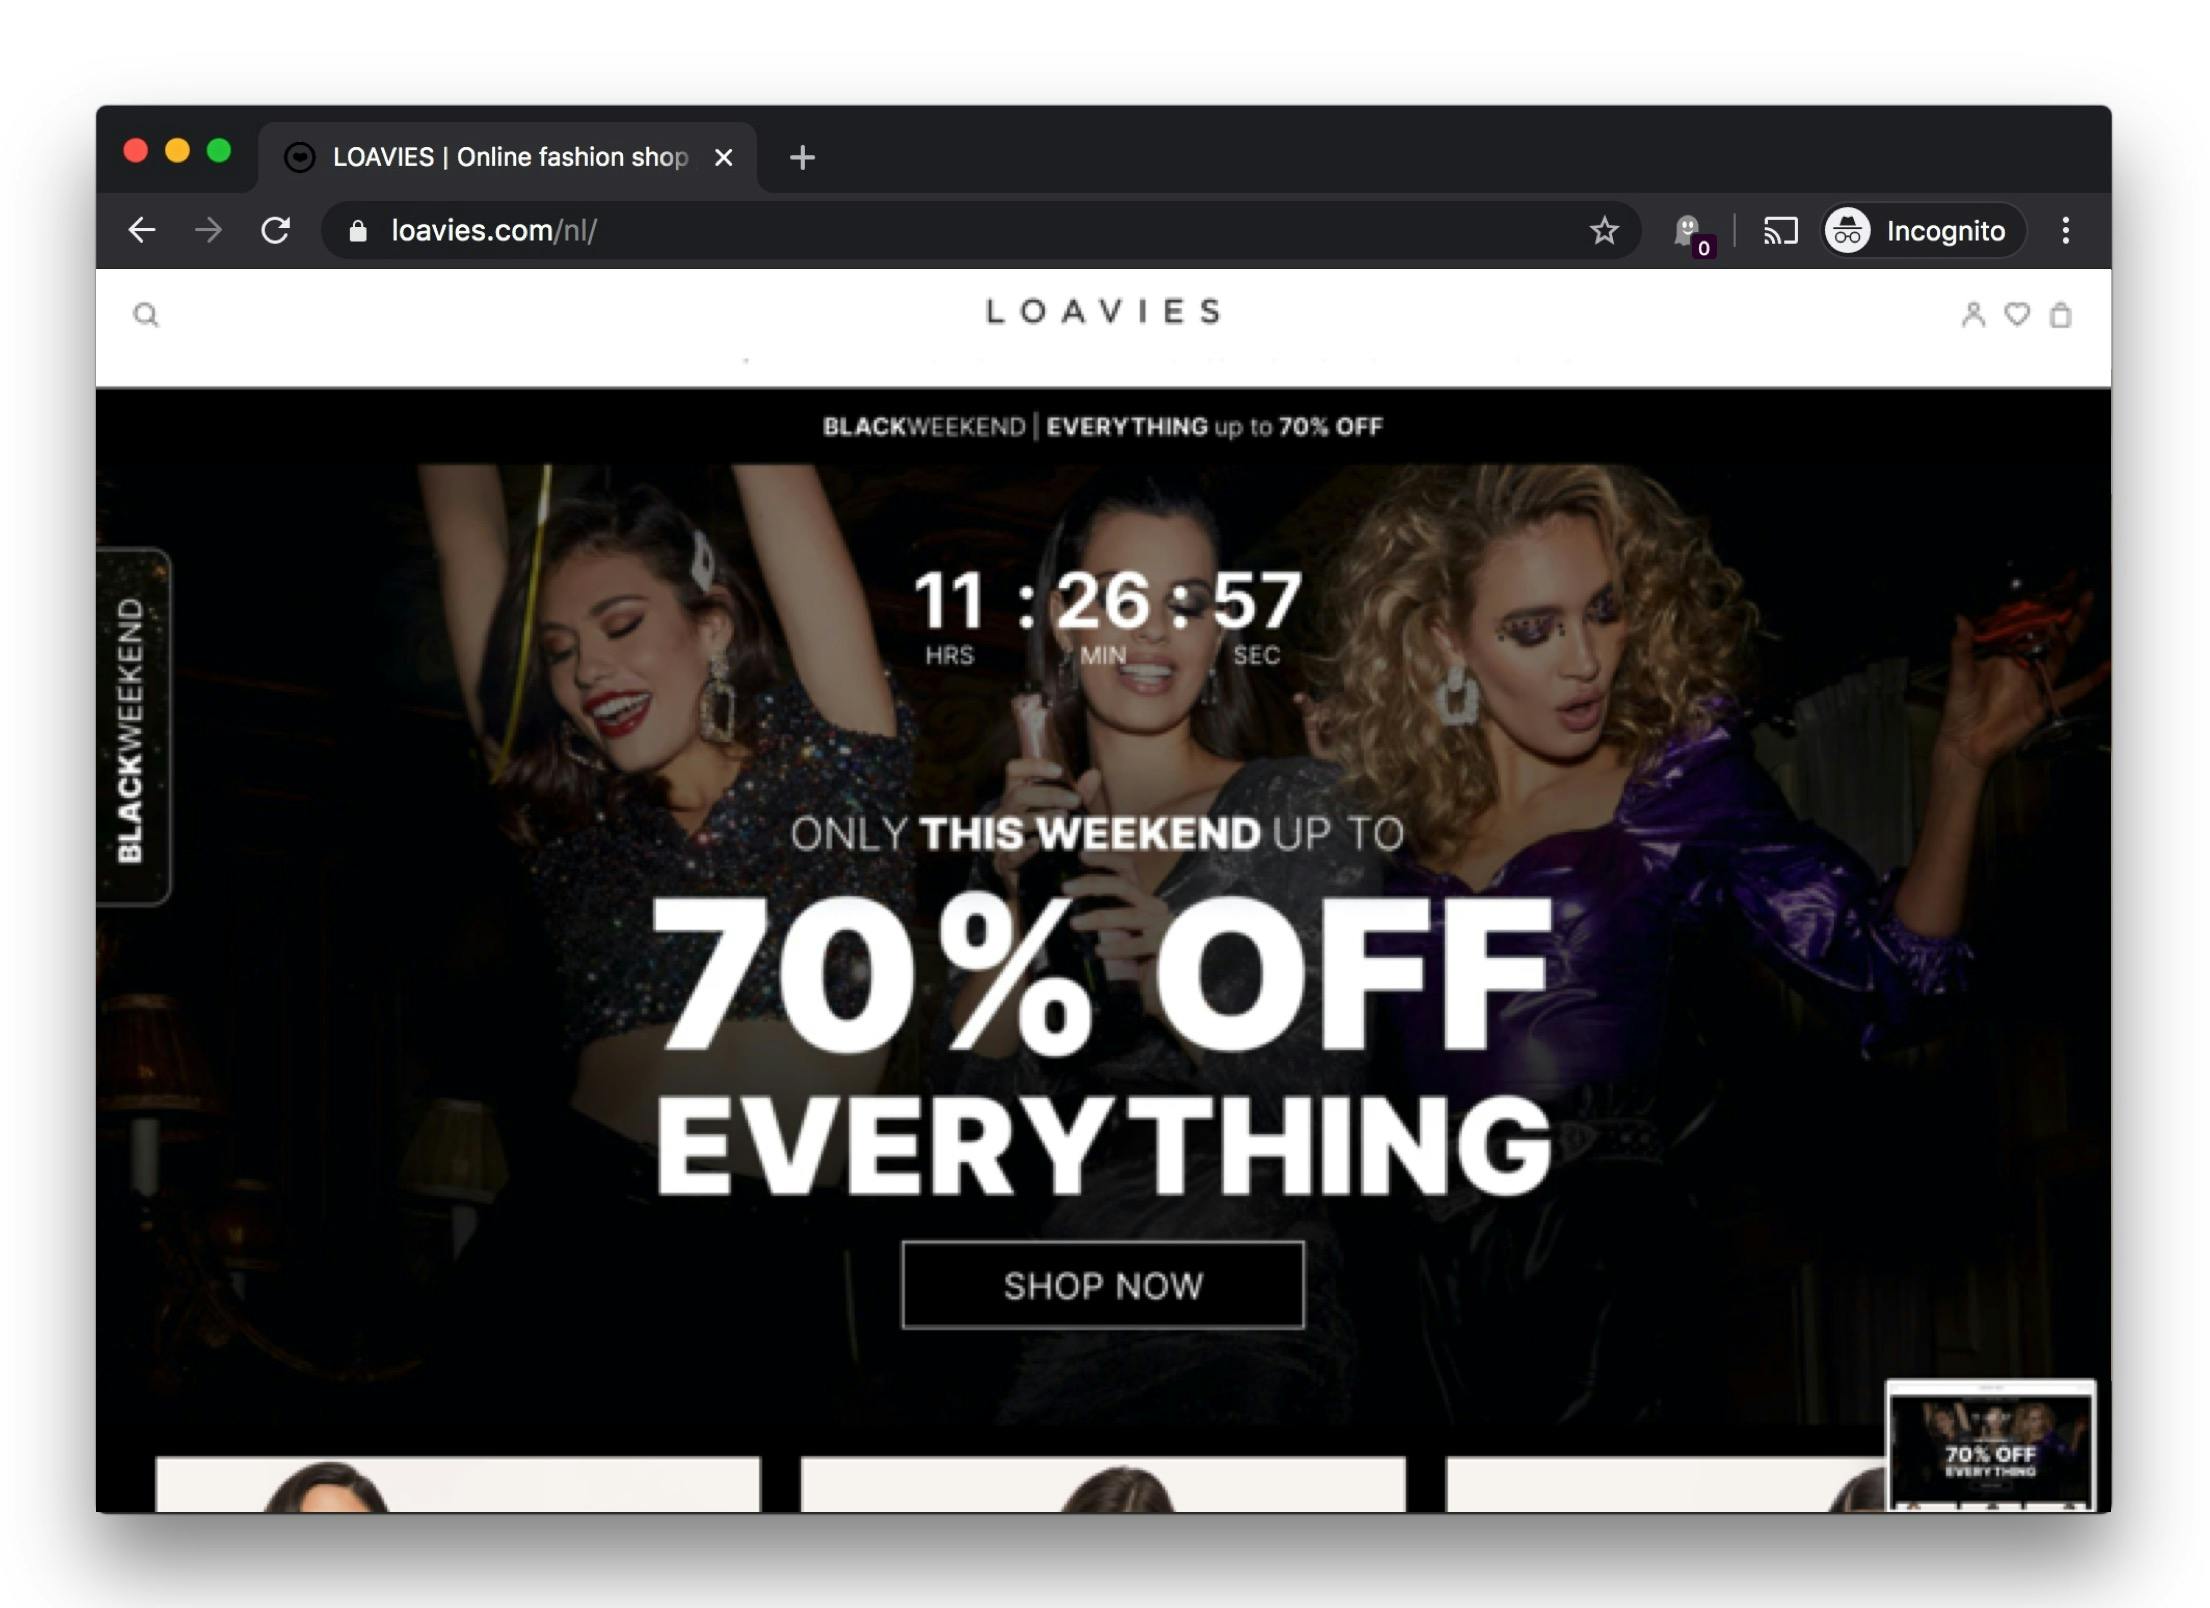 Loavies.com is ready for the Black Friday bustle